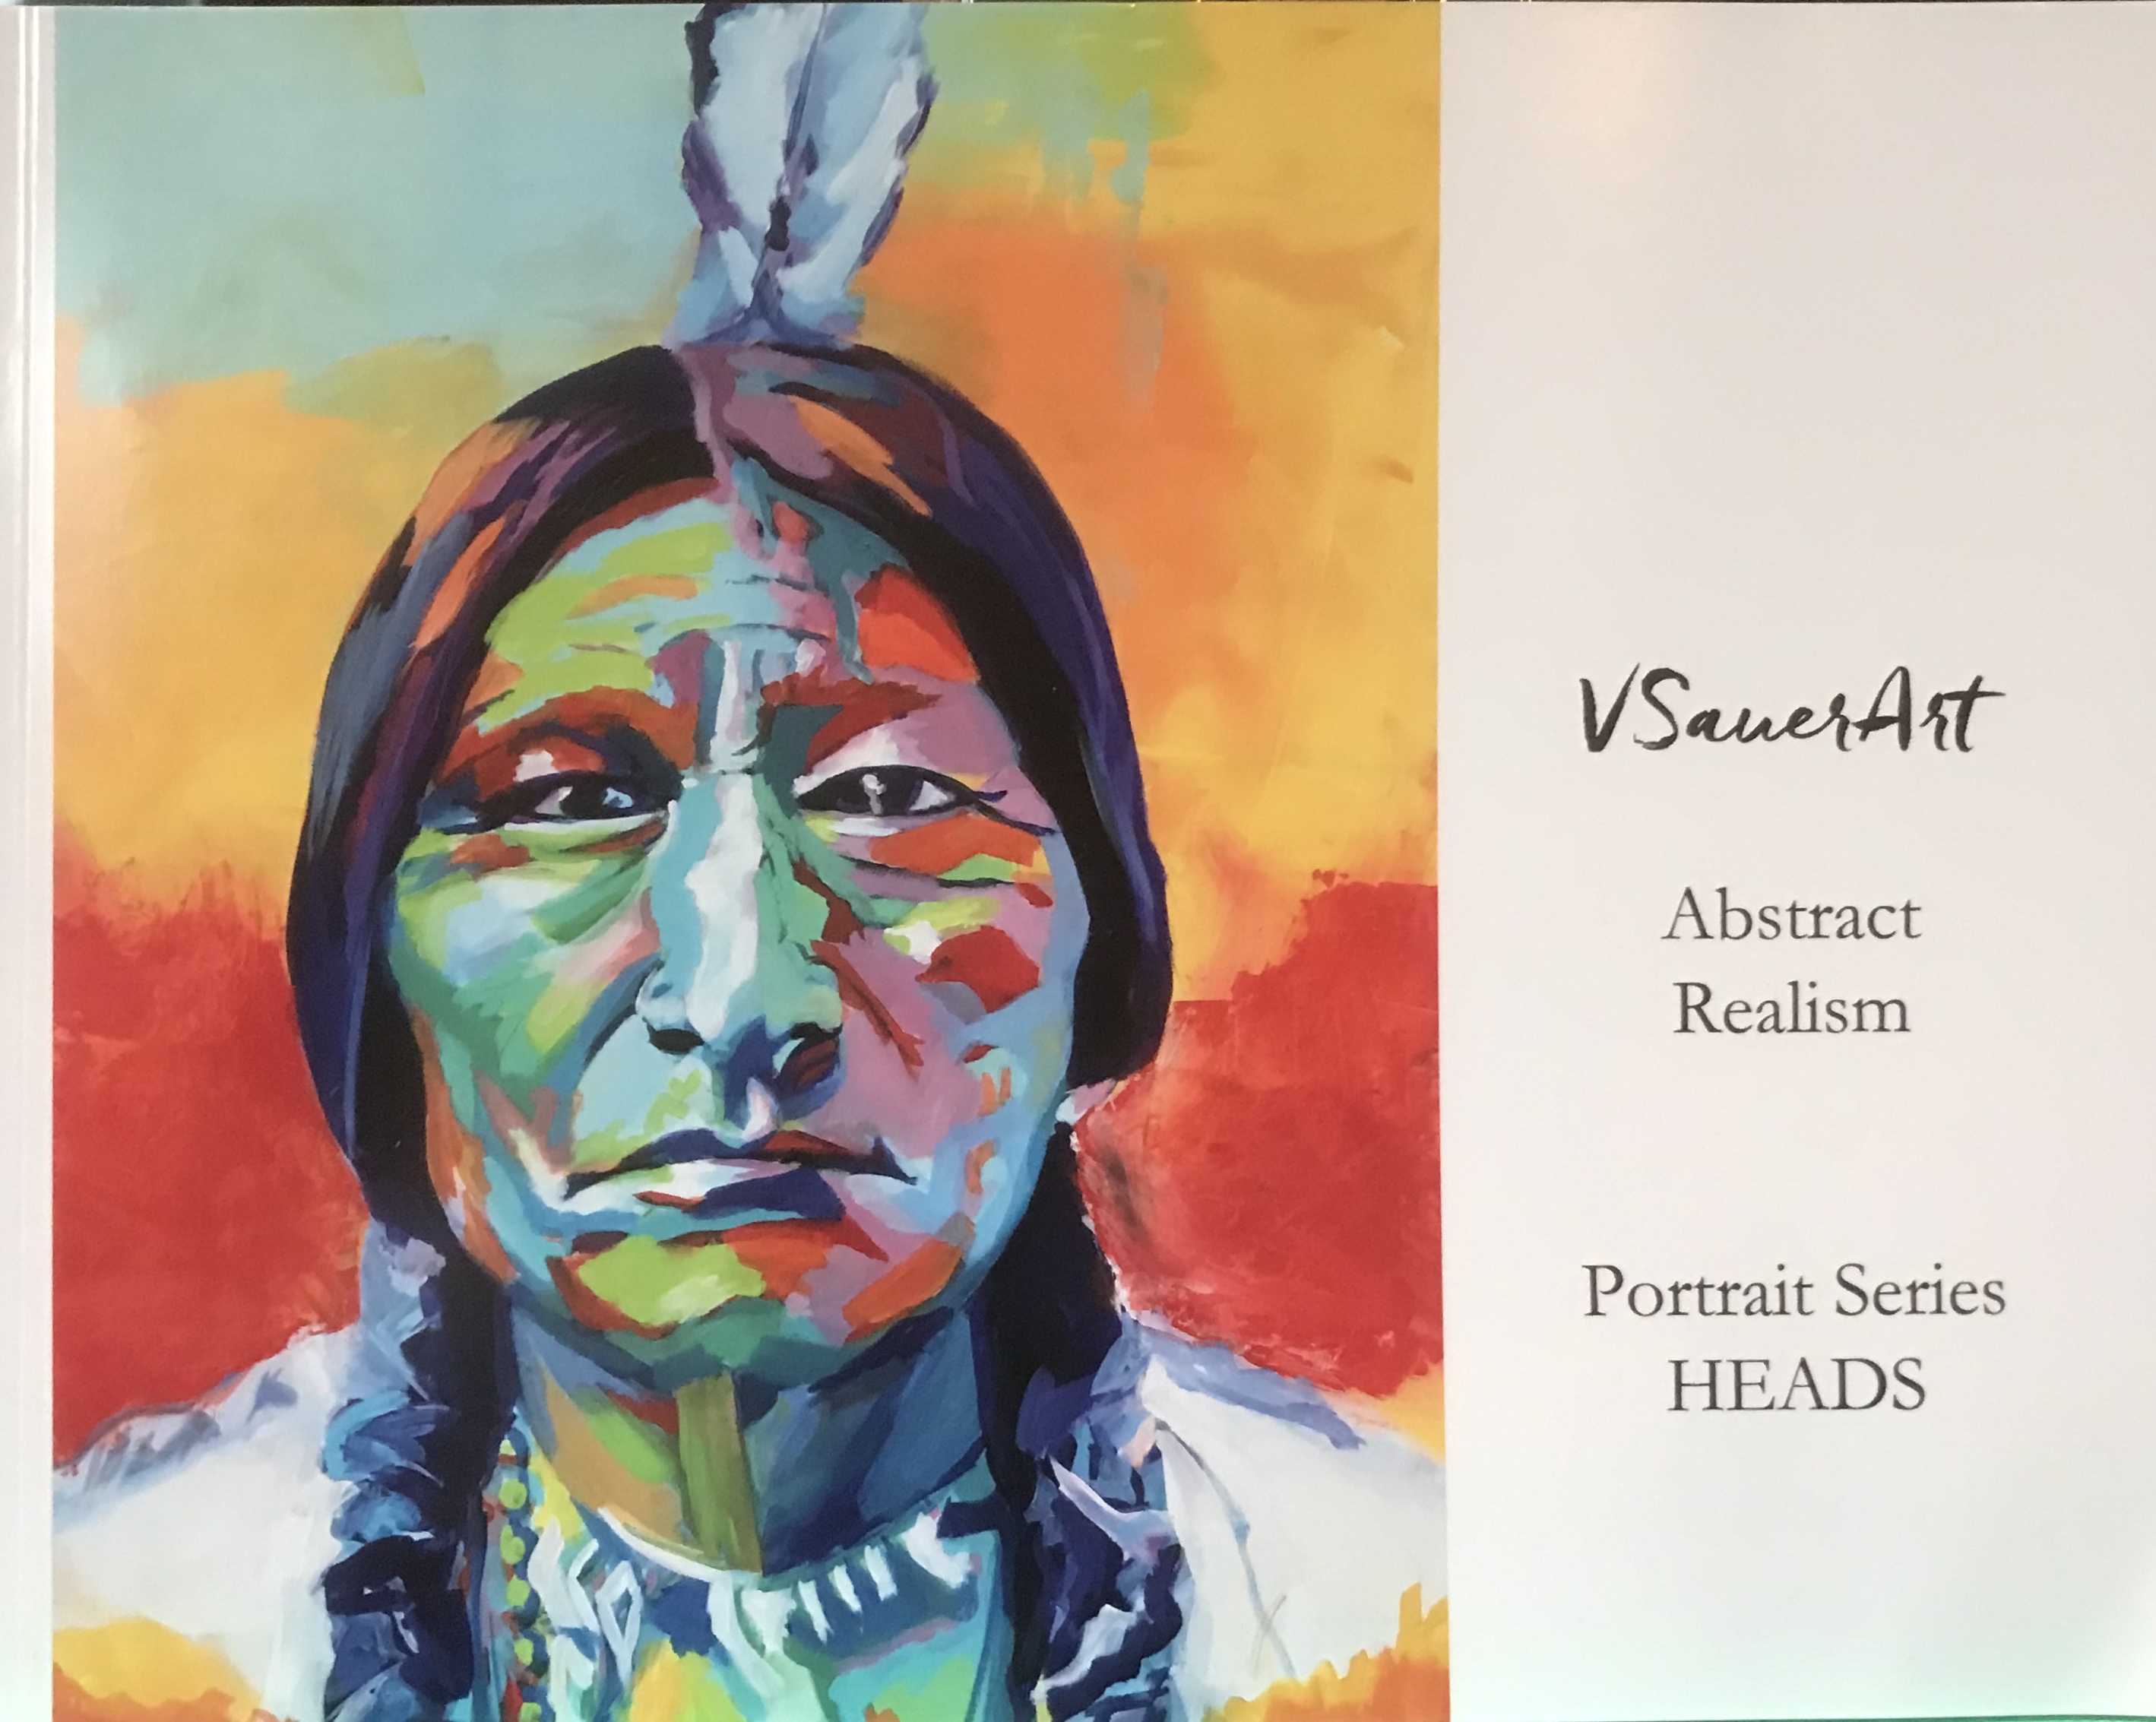 VSauer Art Abstract Realism Portrait Series Book